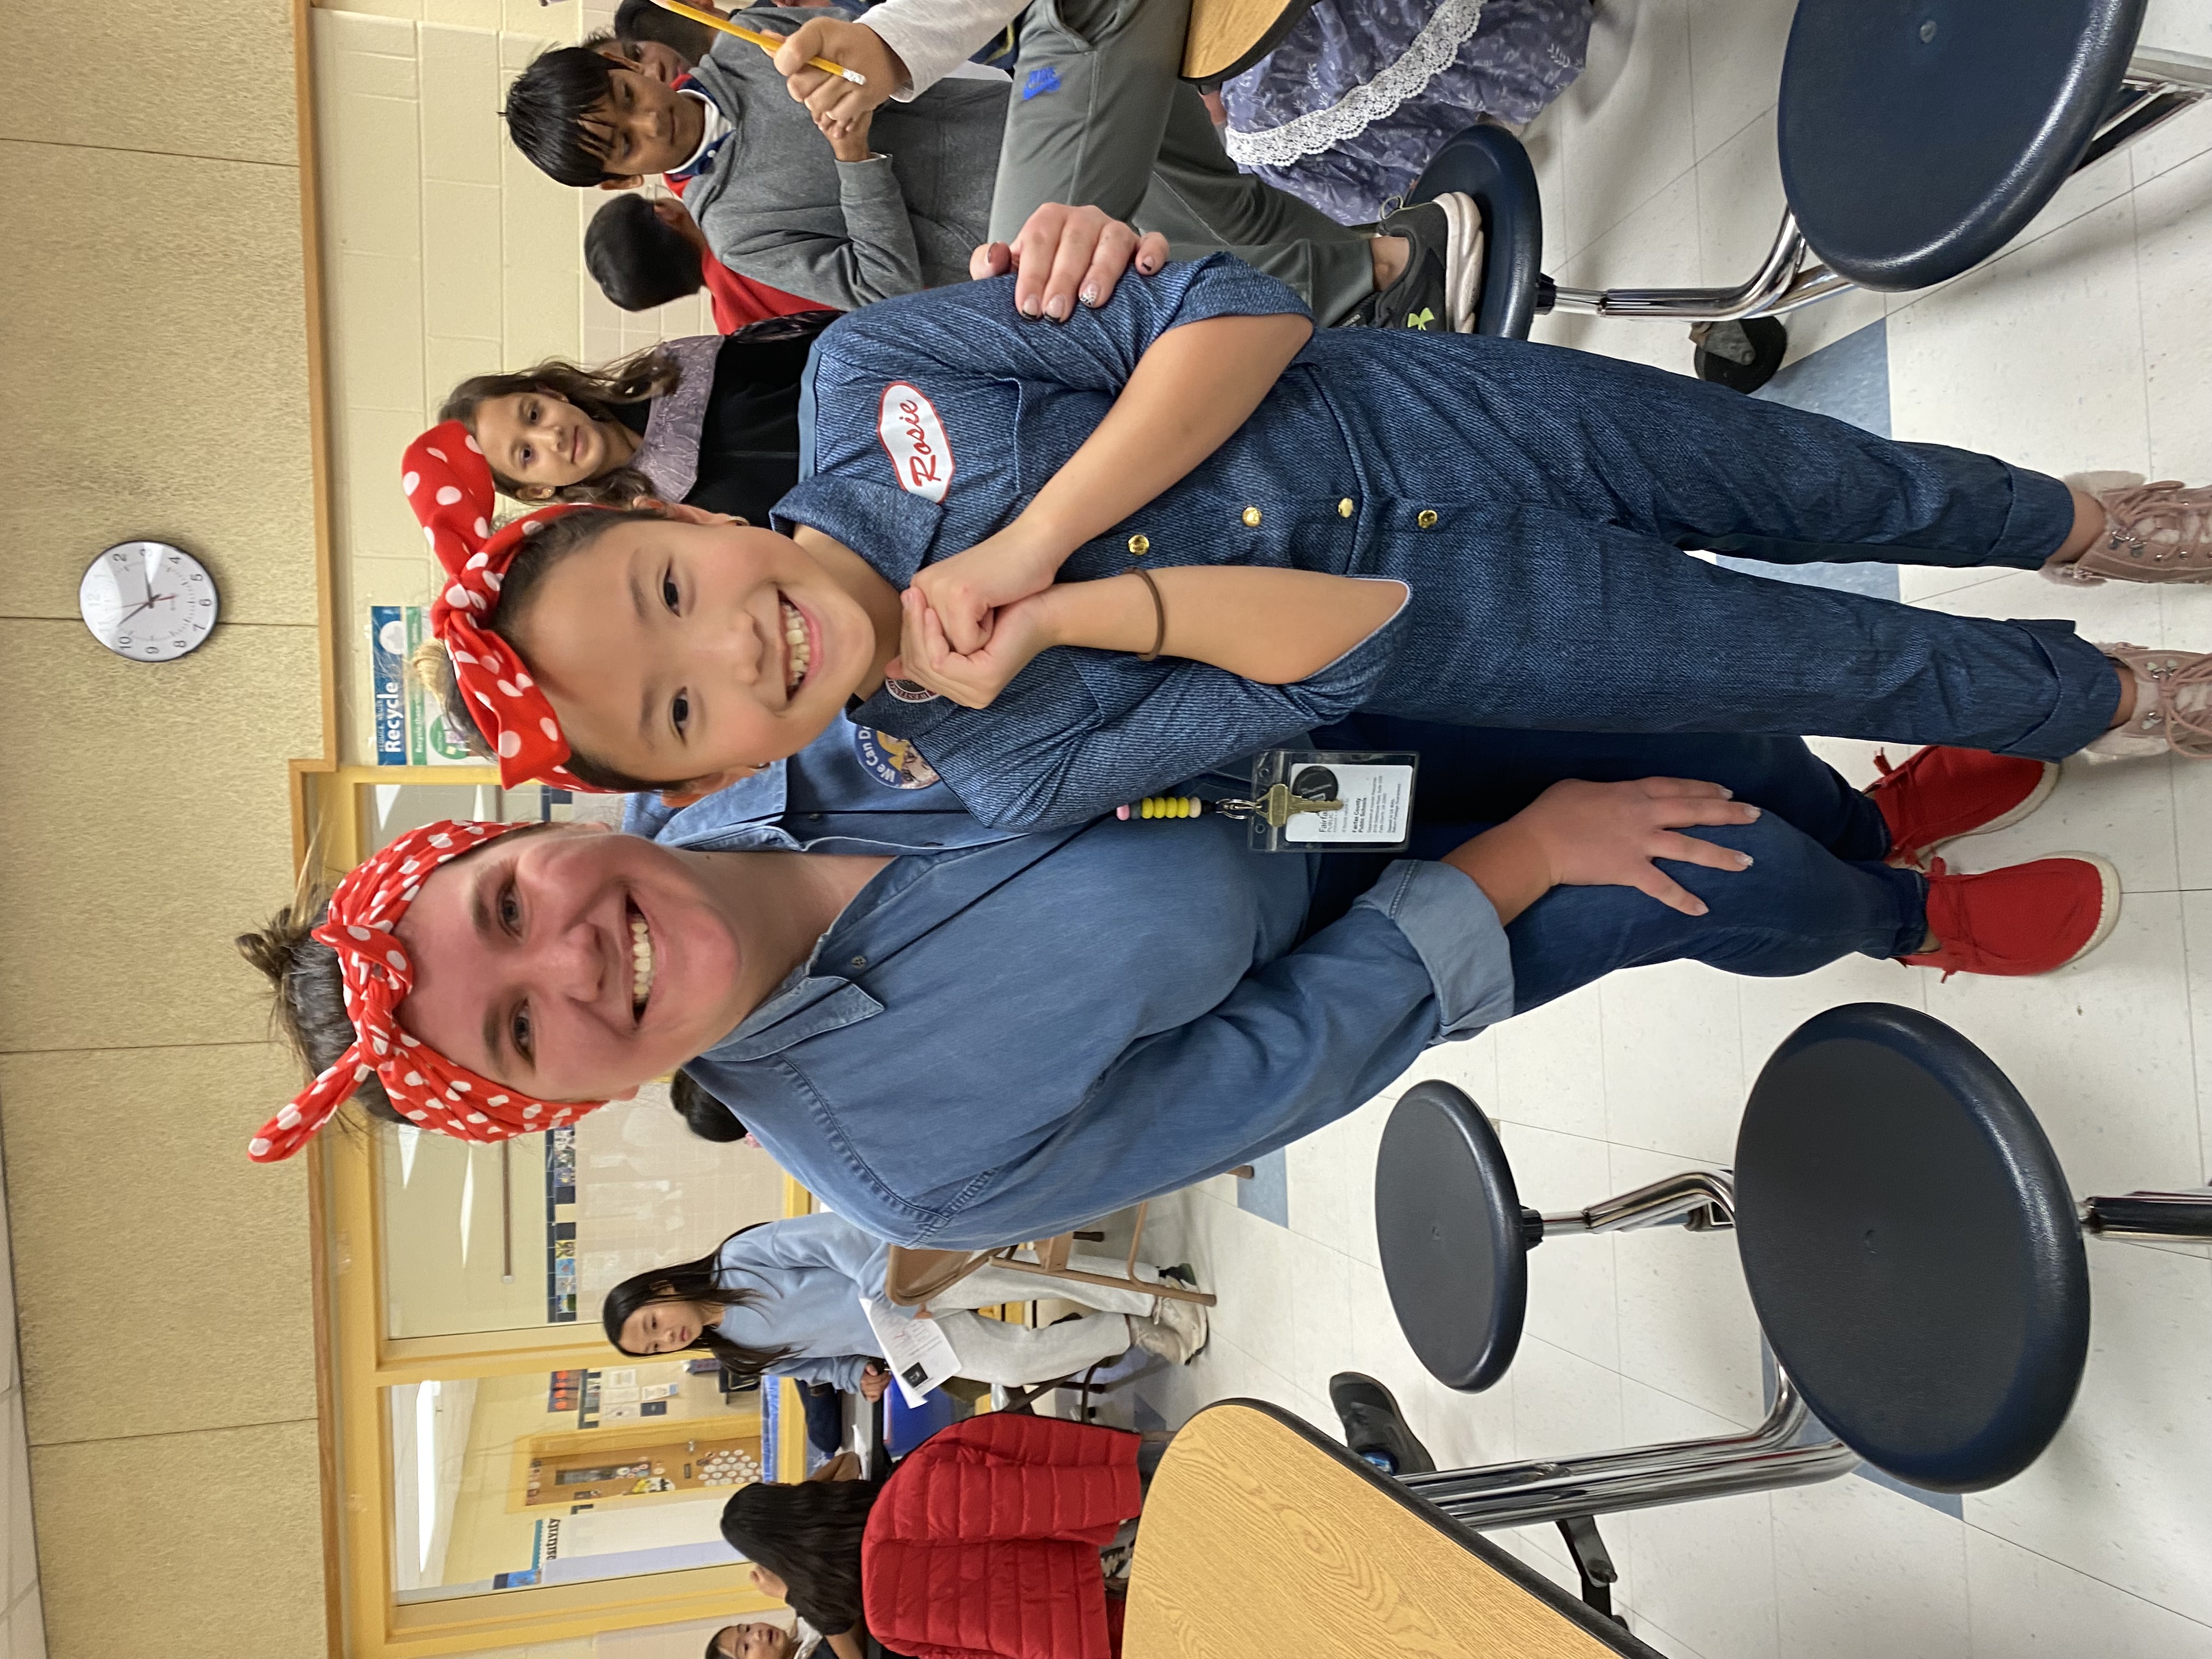 Ms. Kelly and a student both dressed as Rosie the Riveter